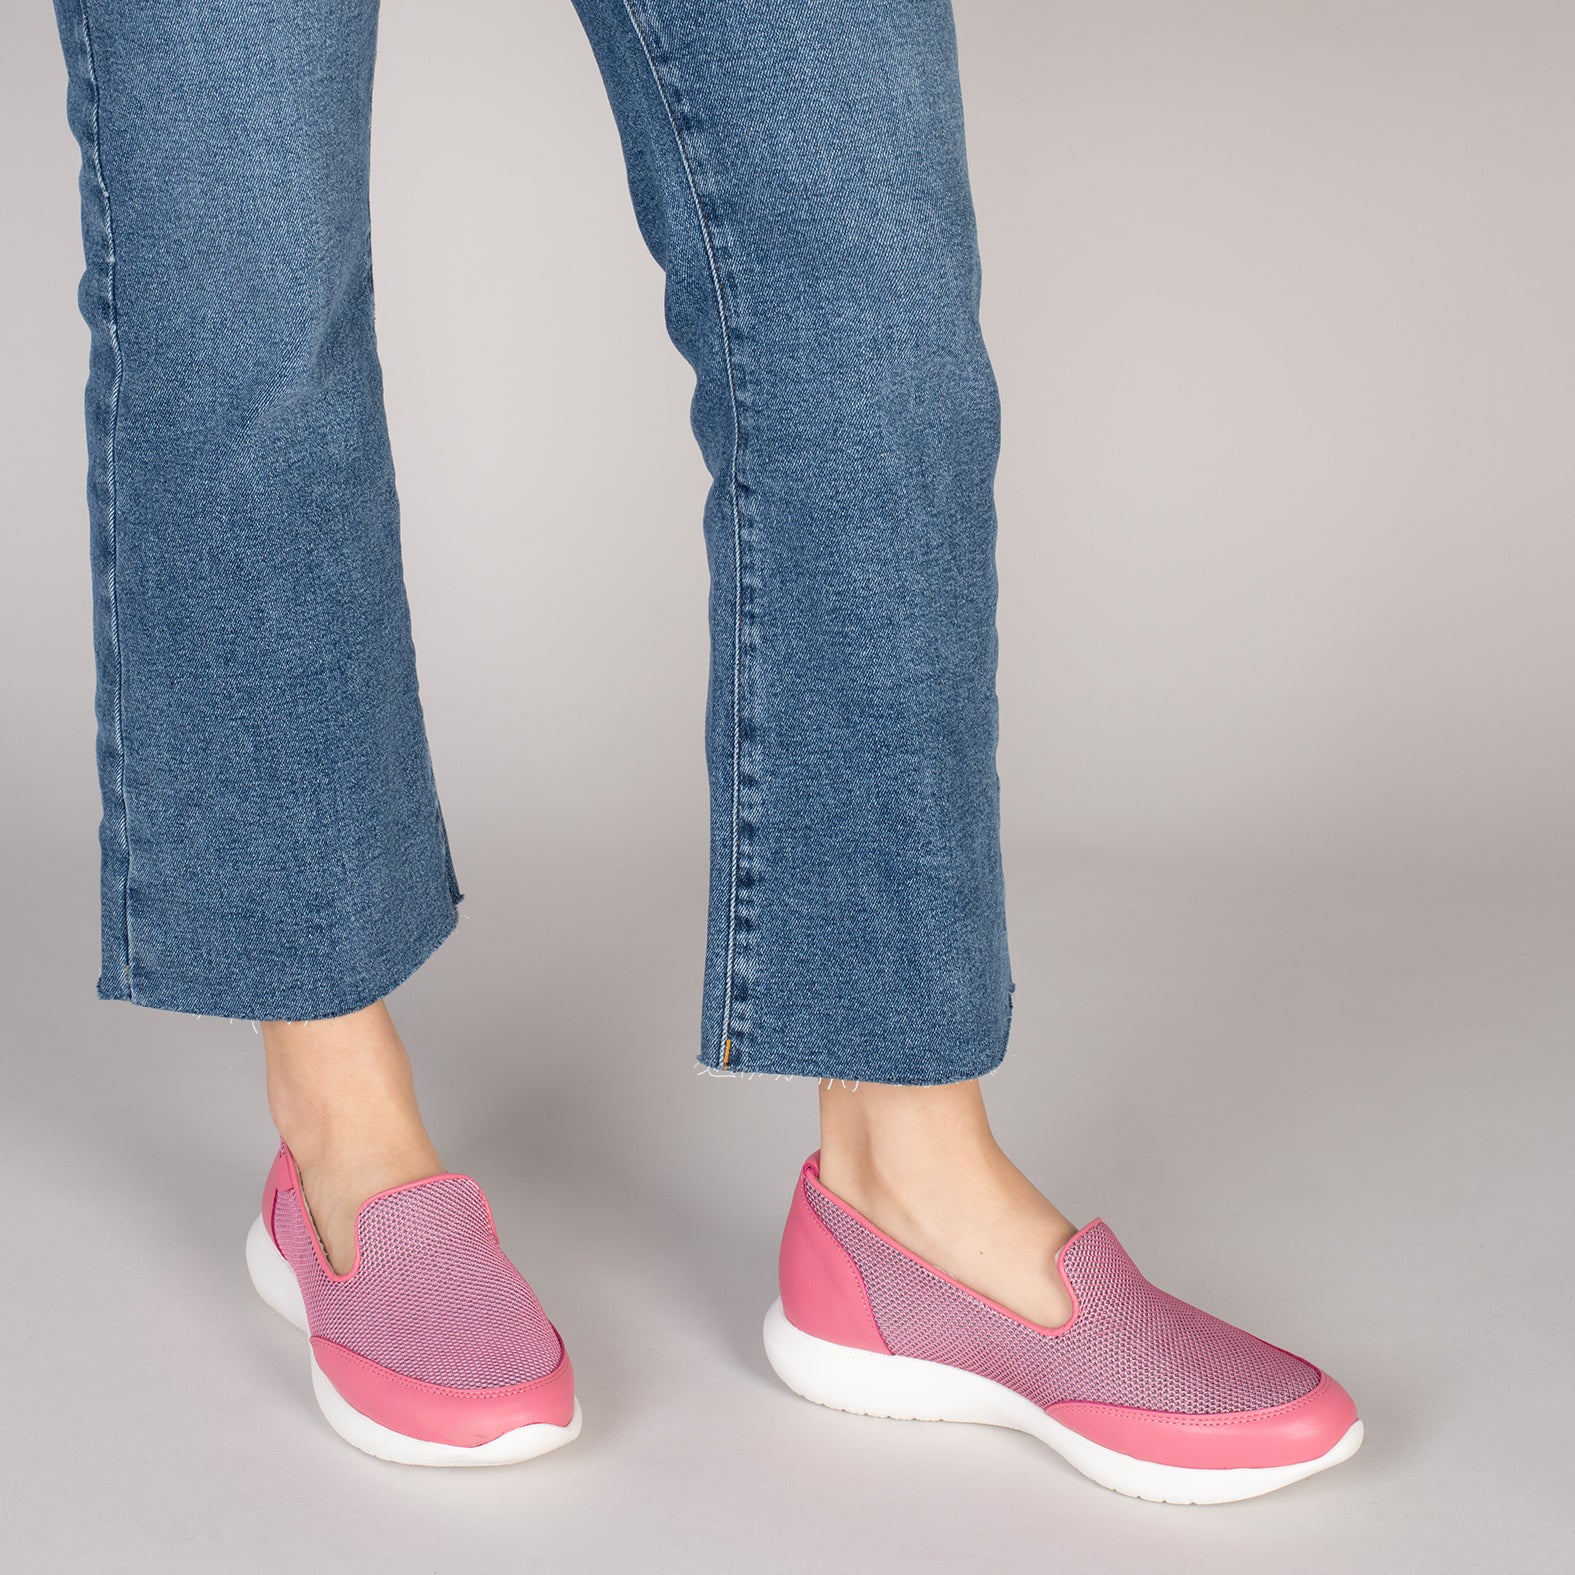 SLIPPER SPORT – PINK sneakers with no laces and mesh design